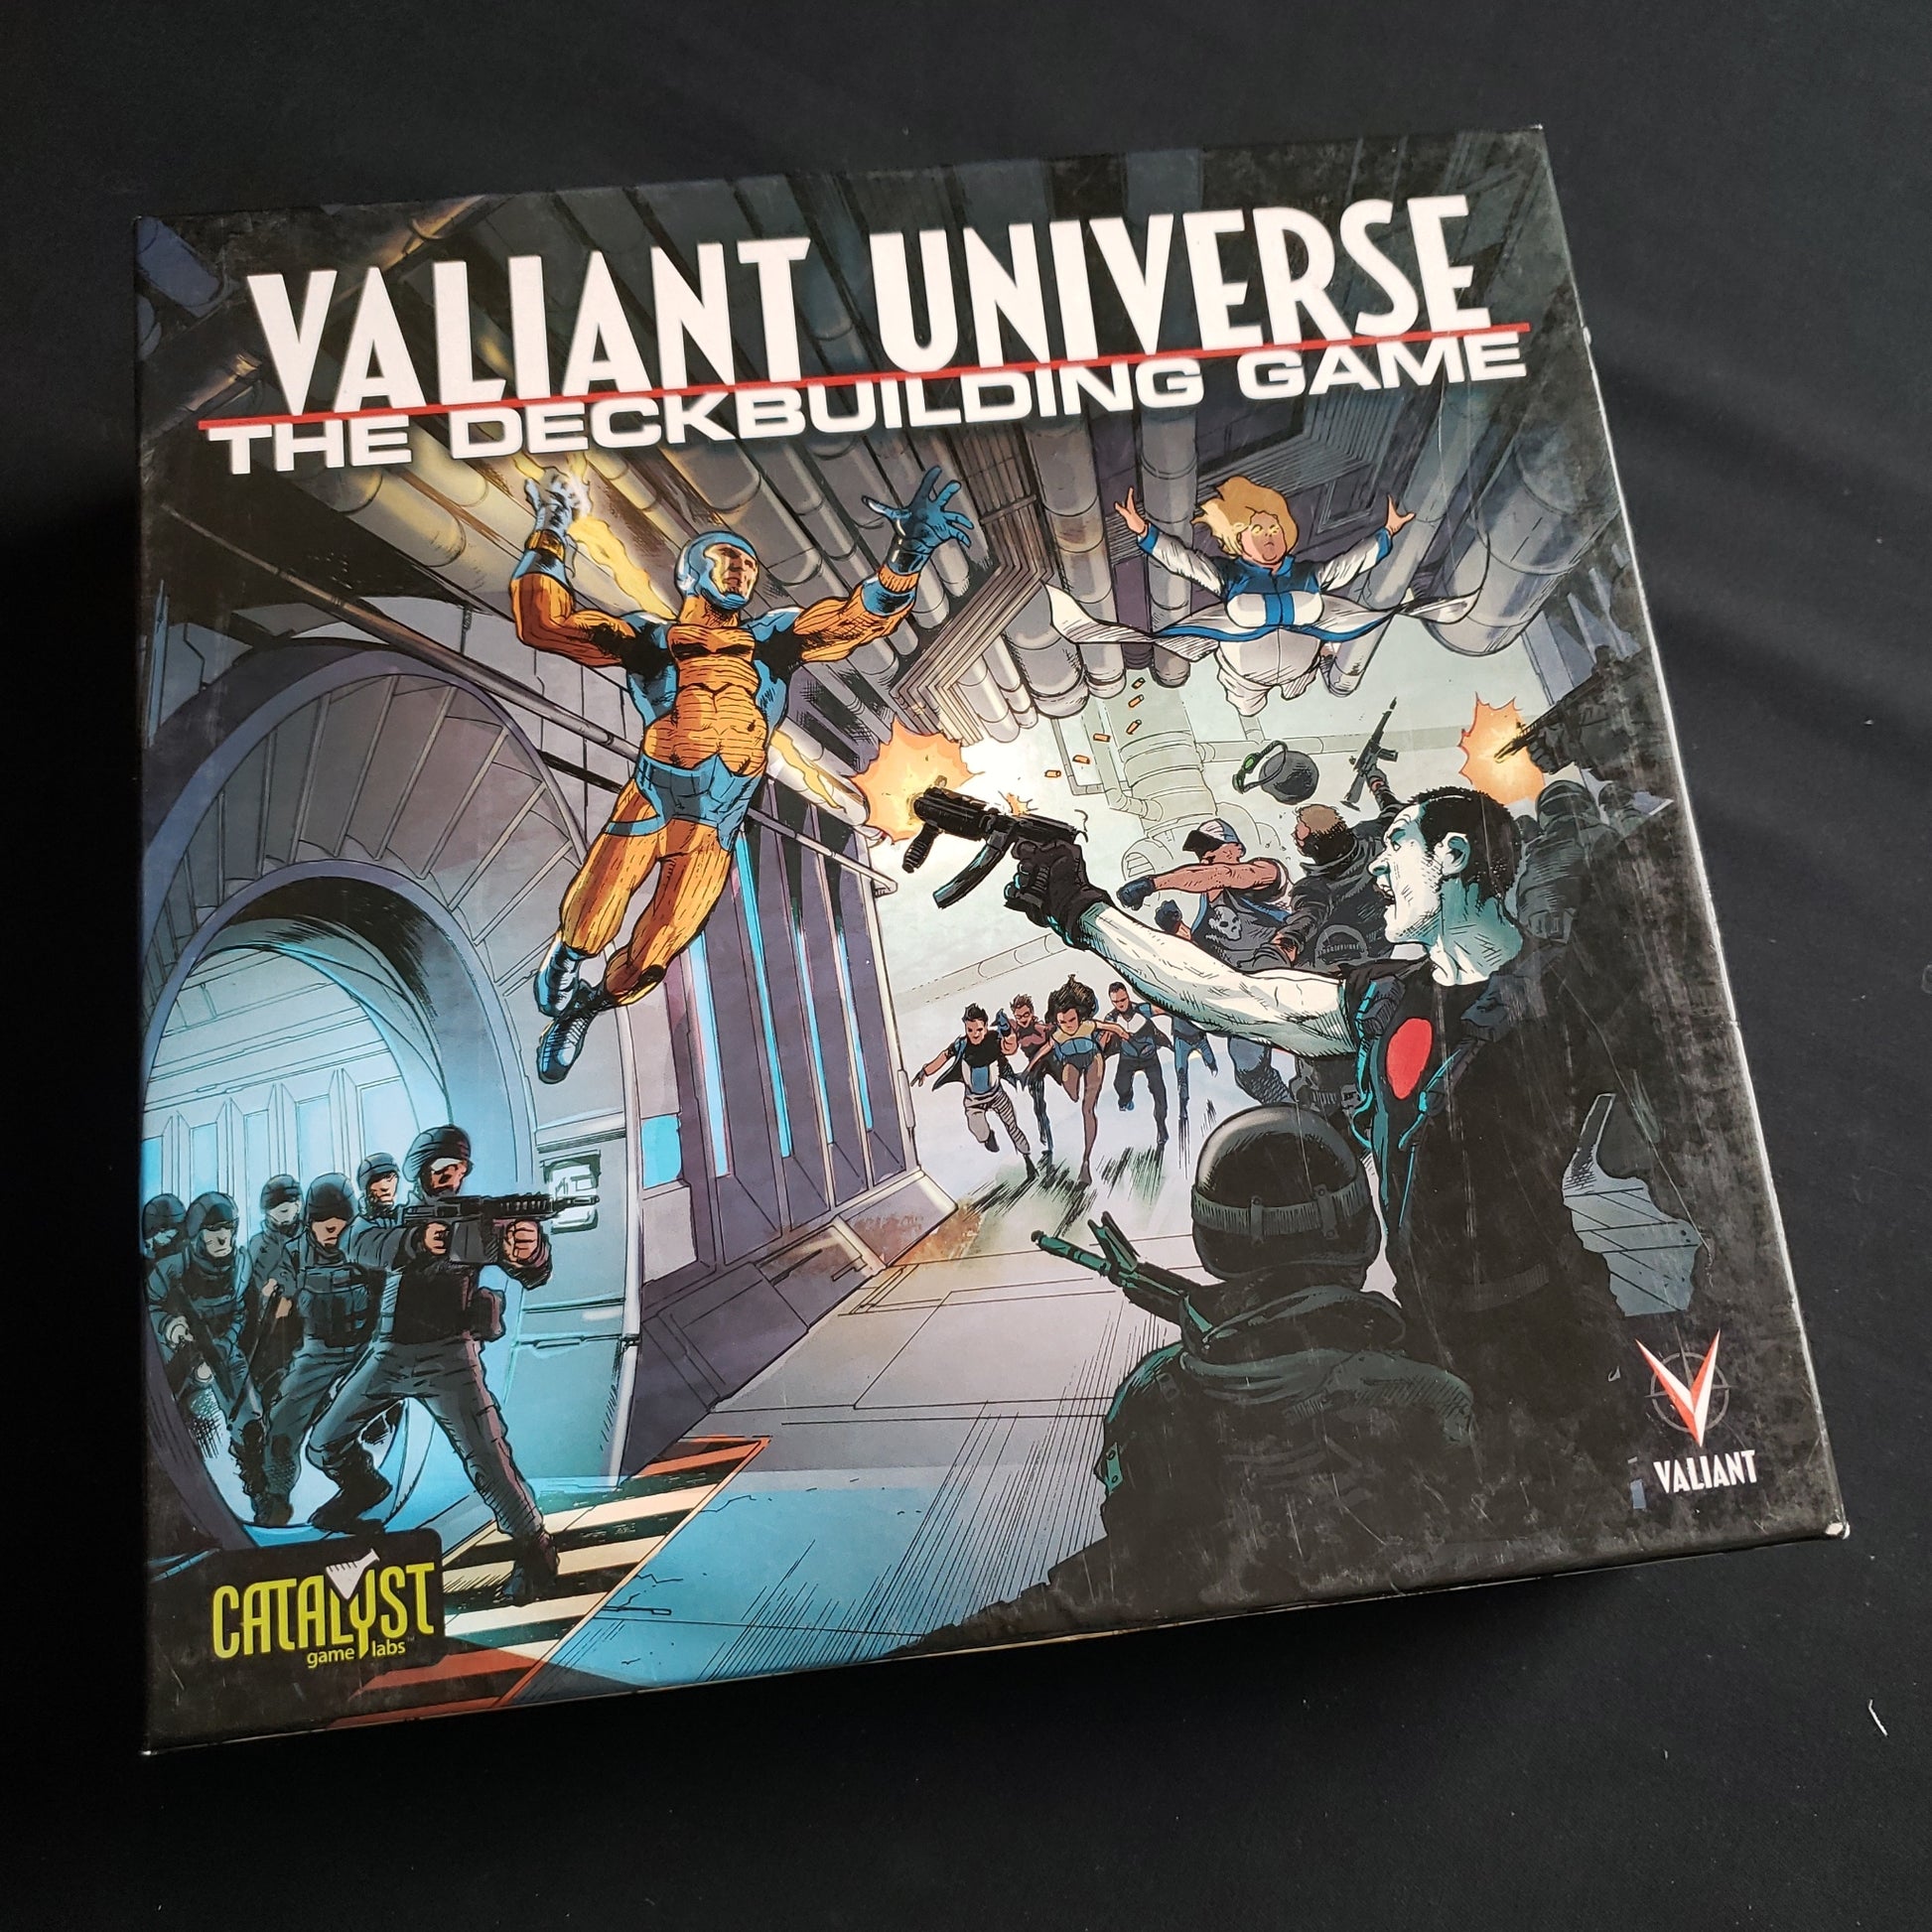 Image shows the front cover of the box of the Valiant Universe Deckbuilding game